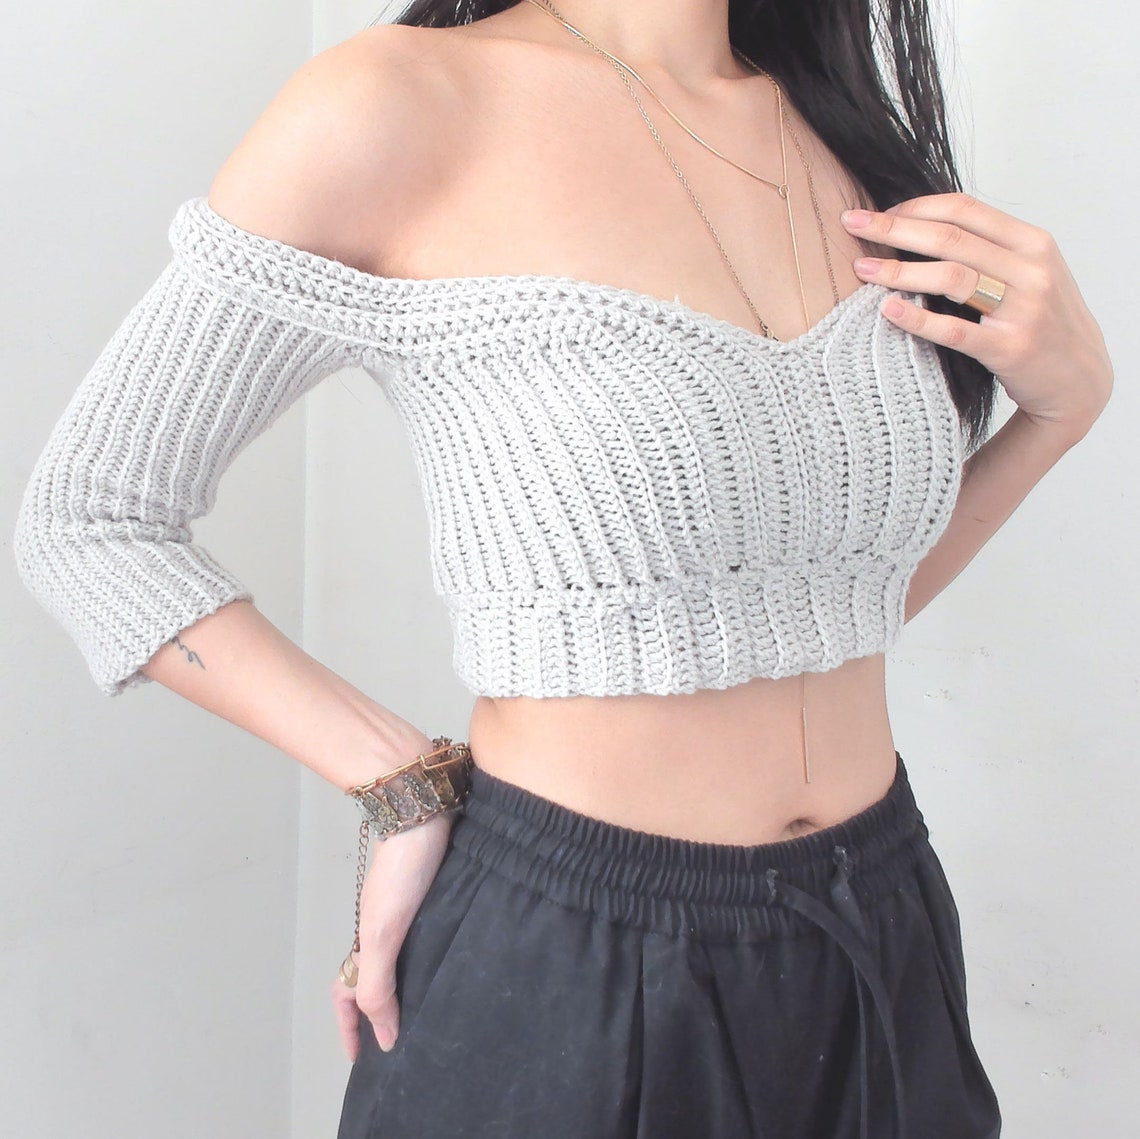 Crochet Leggings and Matching off the Shoulder Crop Top - Etsy